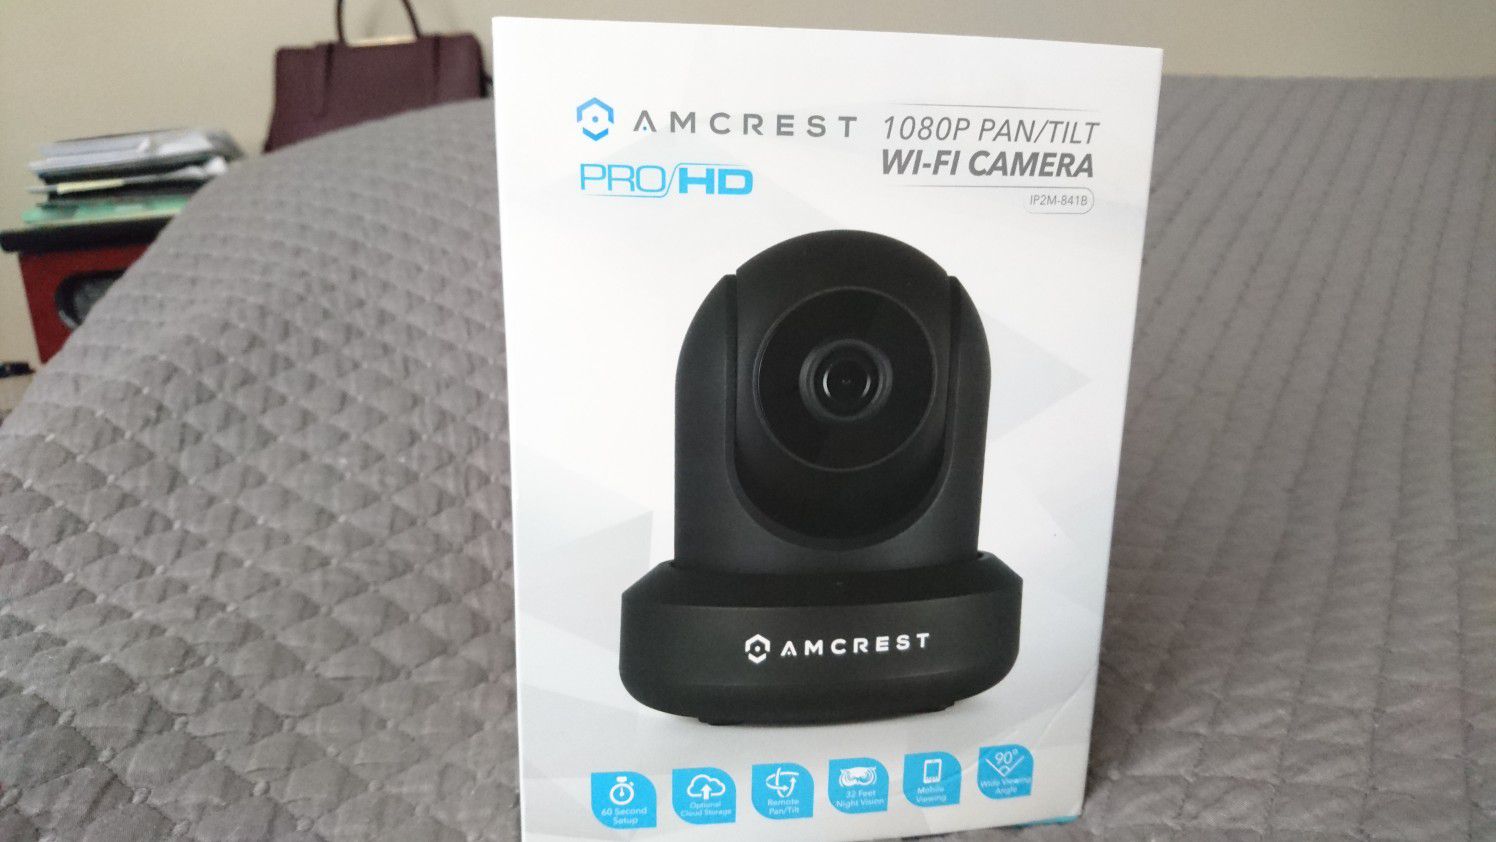 Amcrest Pro Hd wifi Security cam/camera with 1080p